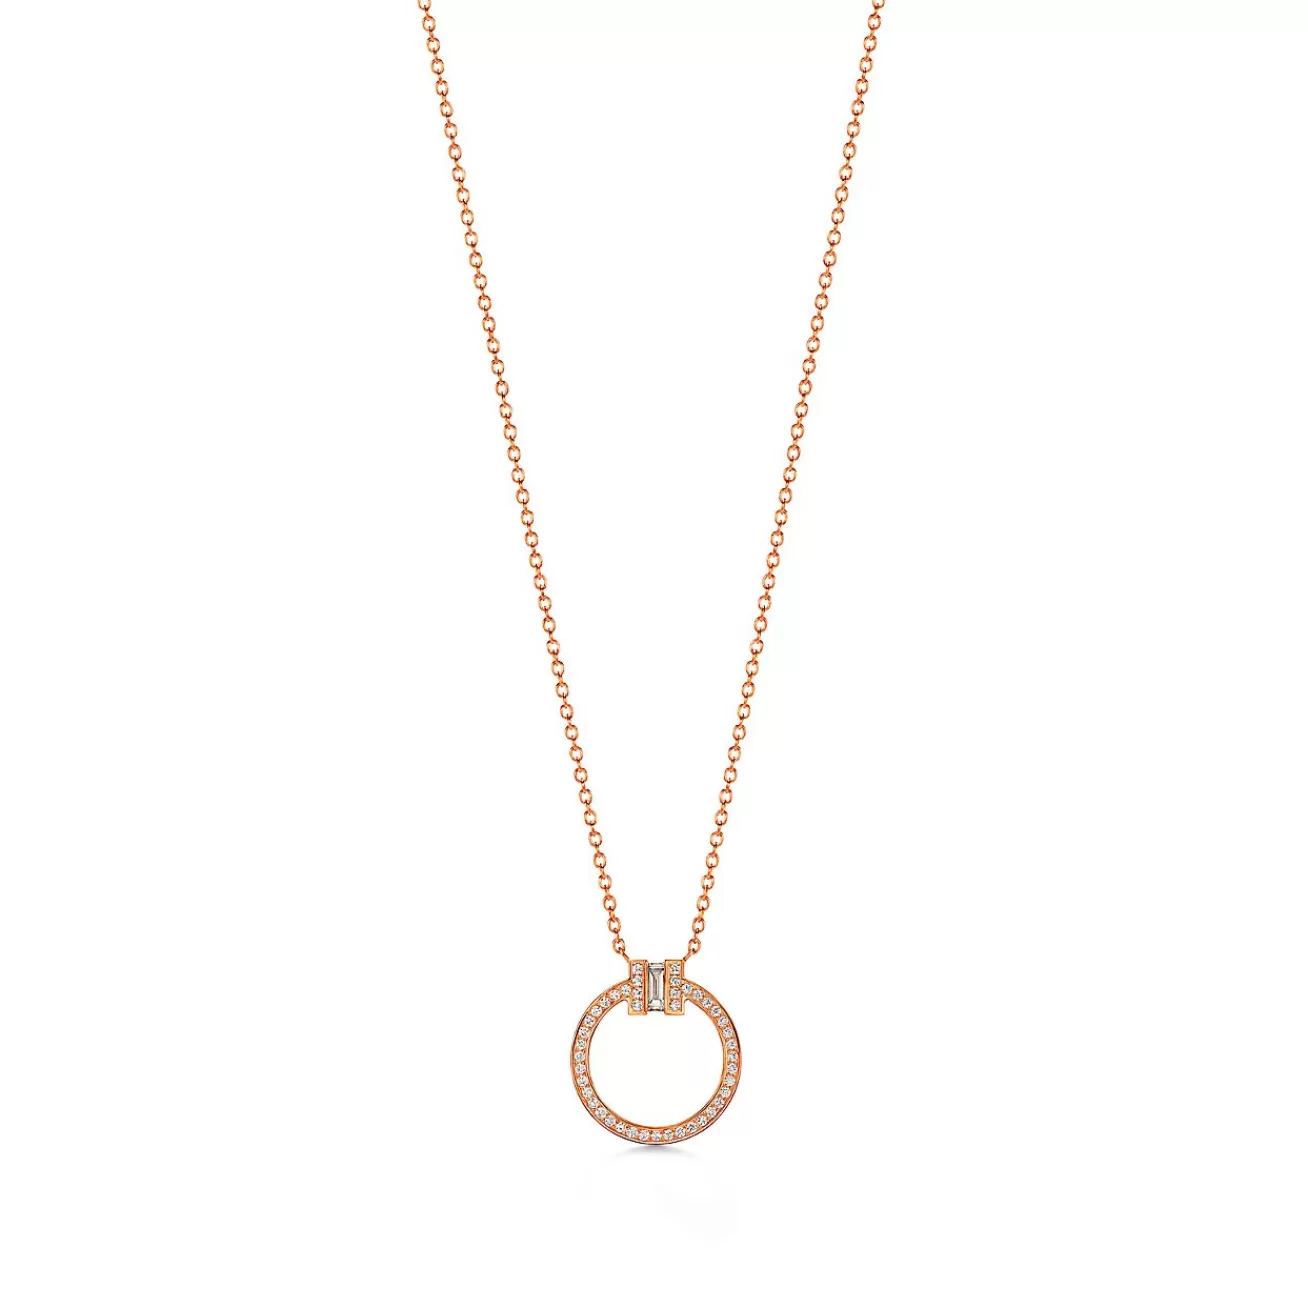 Tiffany & Co. Tiffany T diamond pendant in 18k rose gold with a baguette diamond. | ^ Necklaces & Pendants | Rose Gold Jewelry